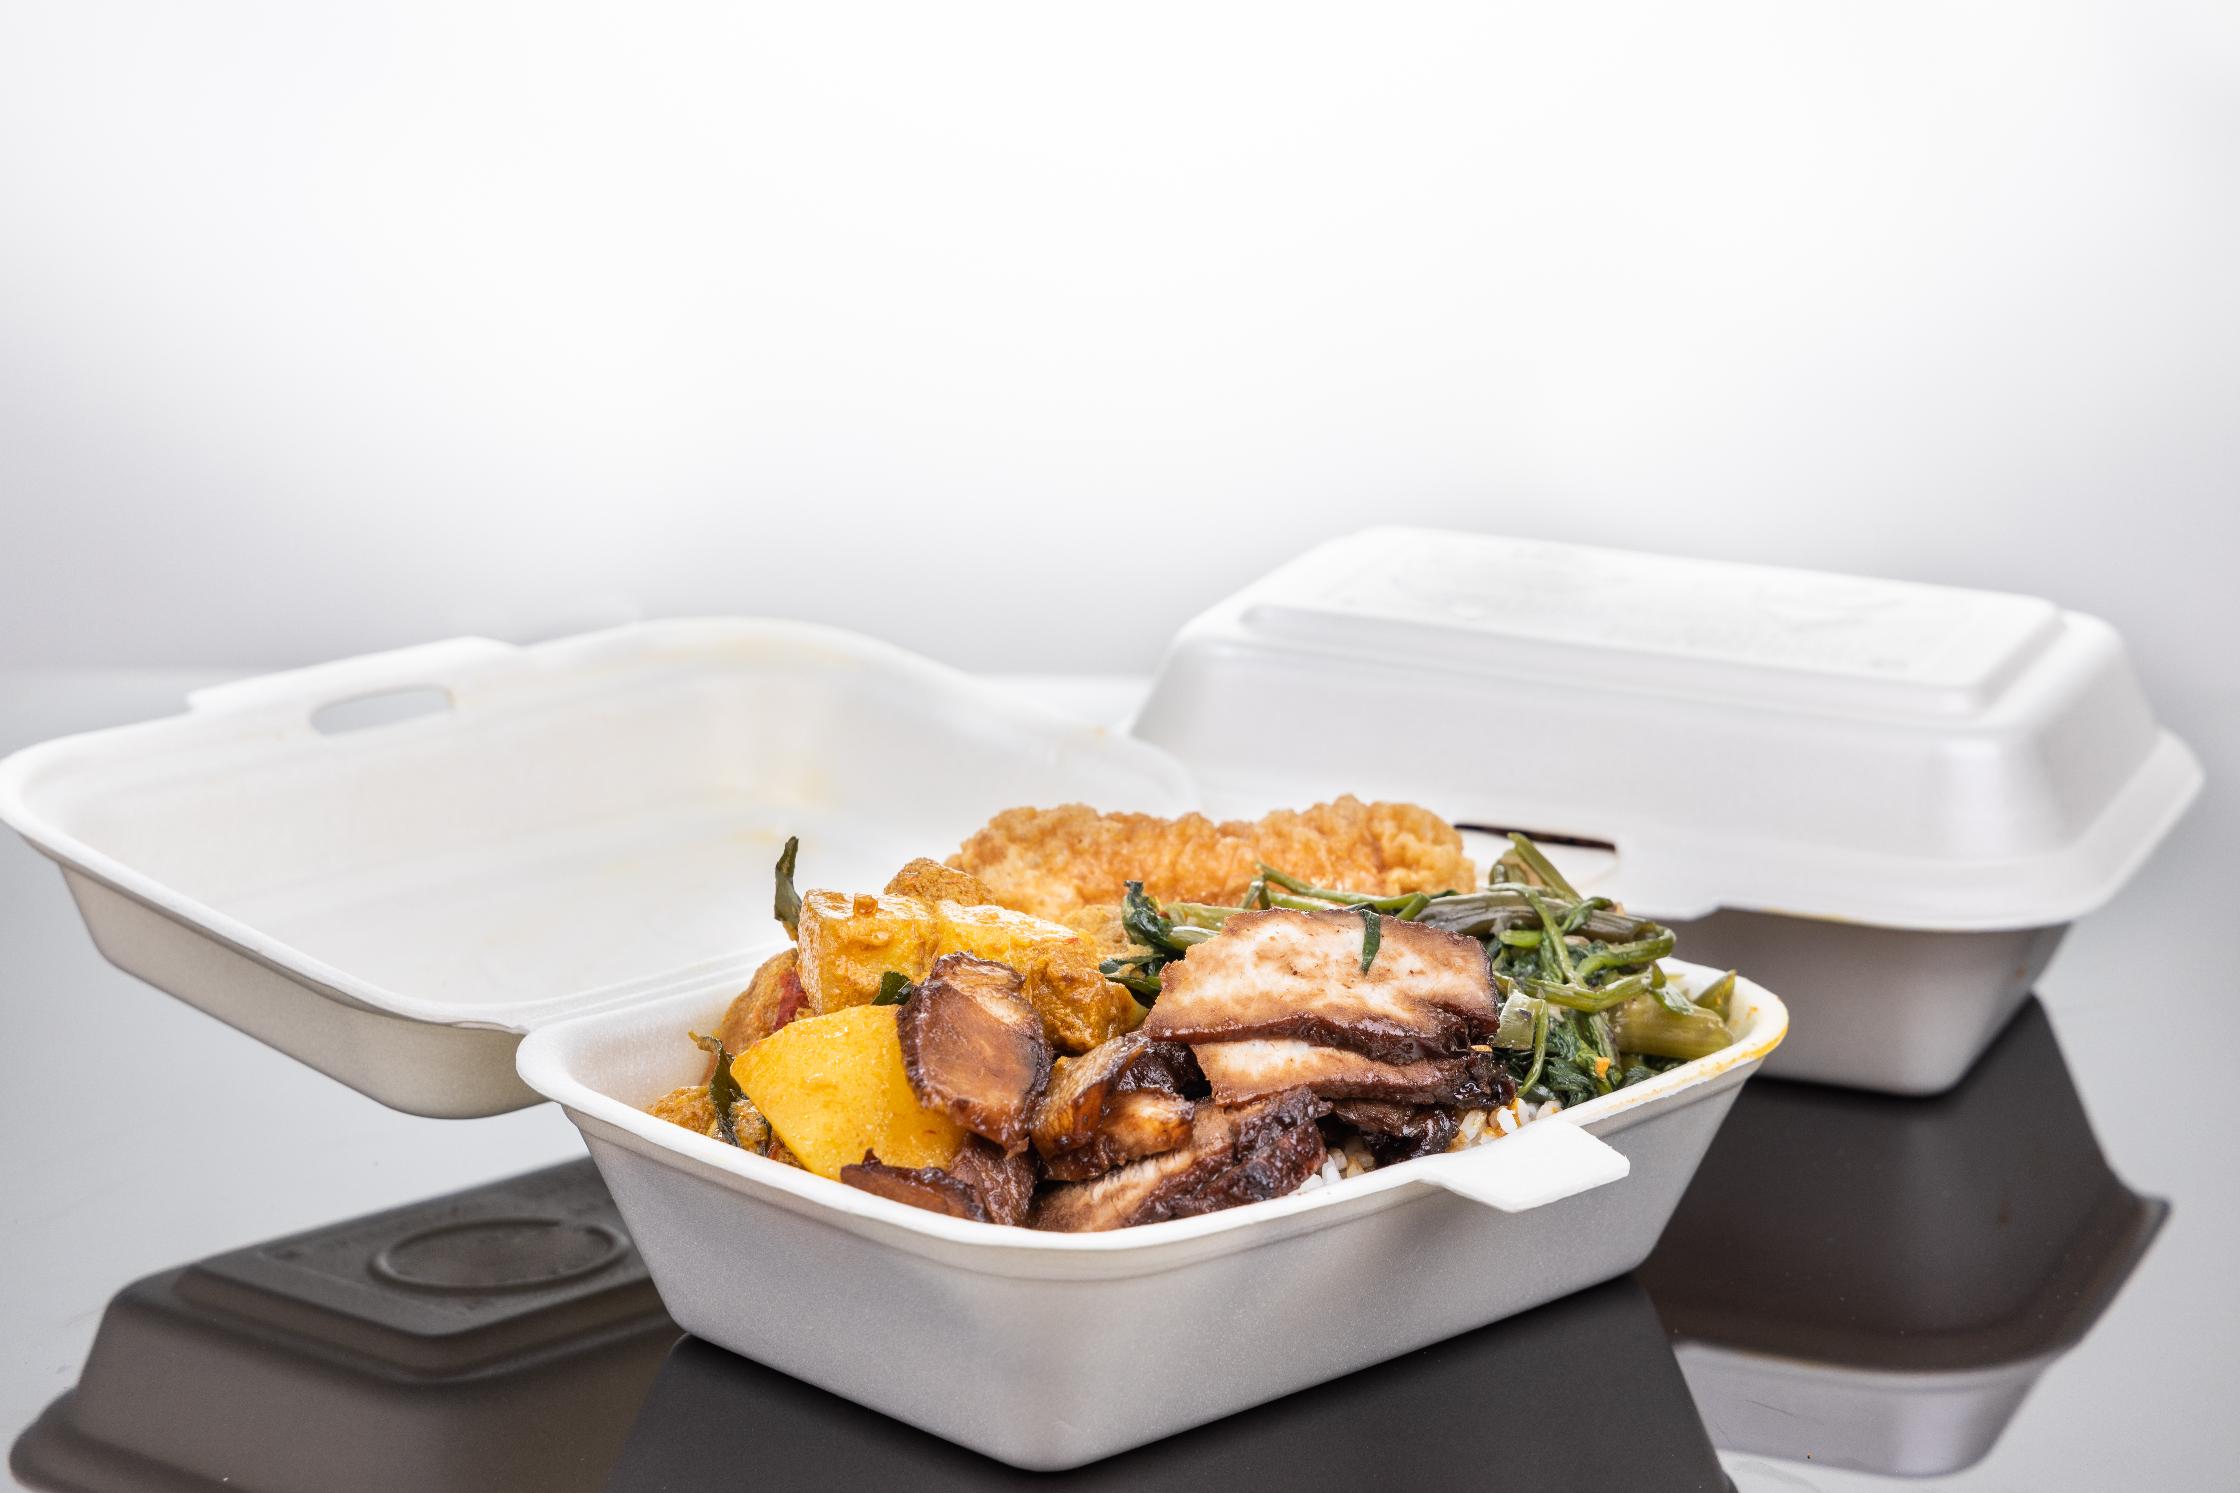 Biodegradable Food Takeout Packaging - The Way Forward For Restaurants